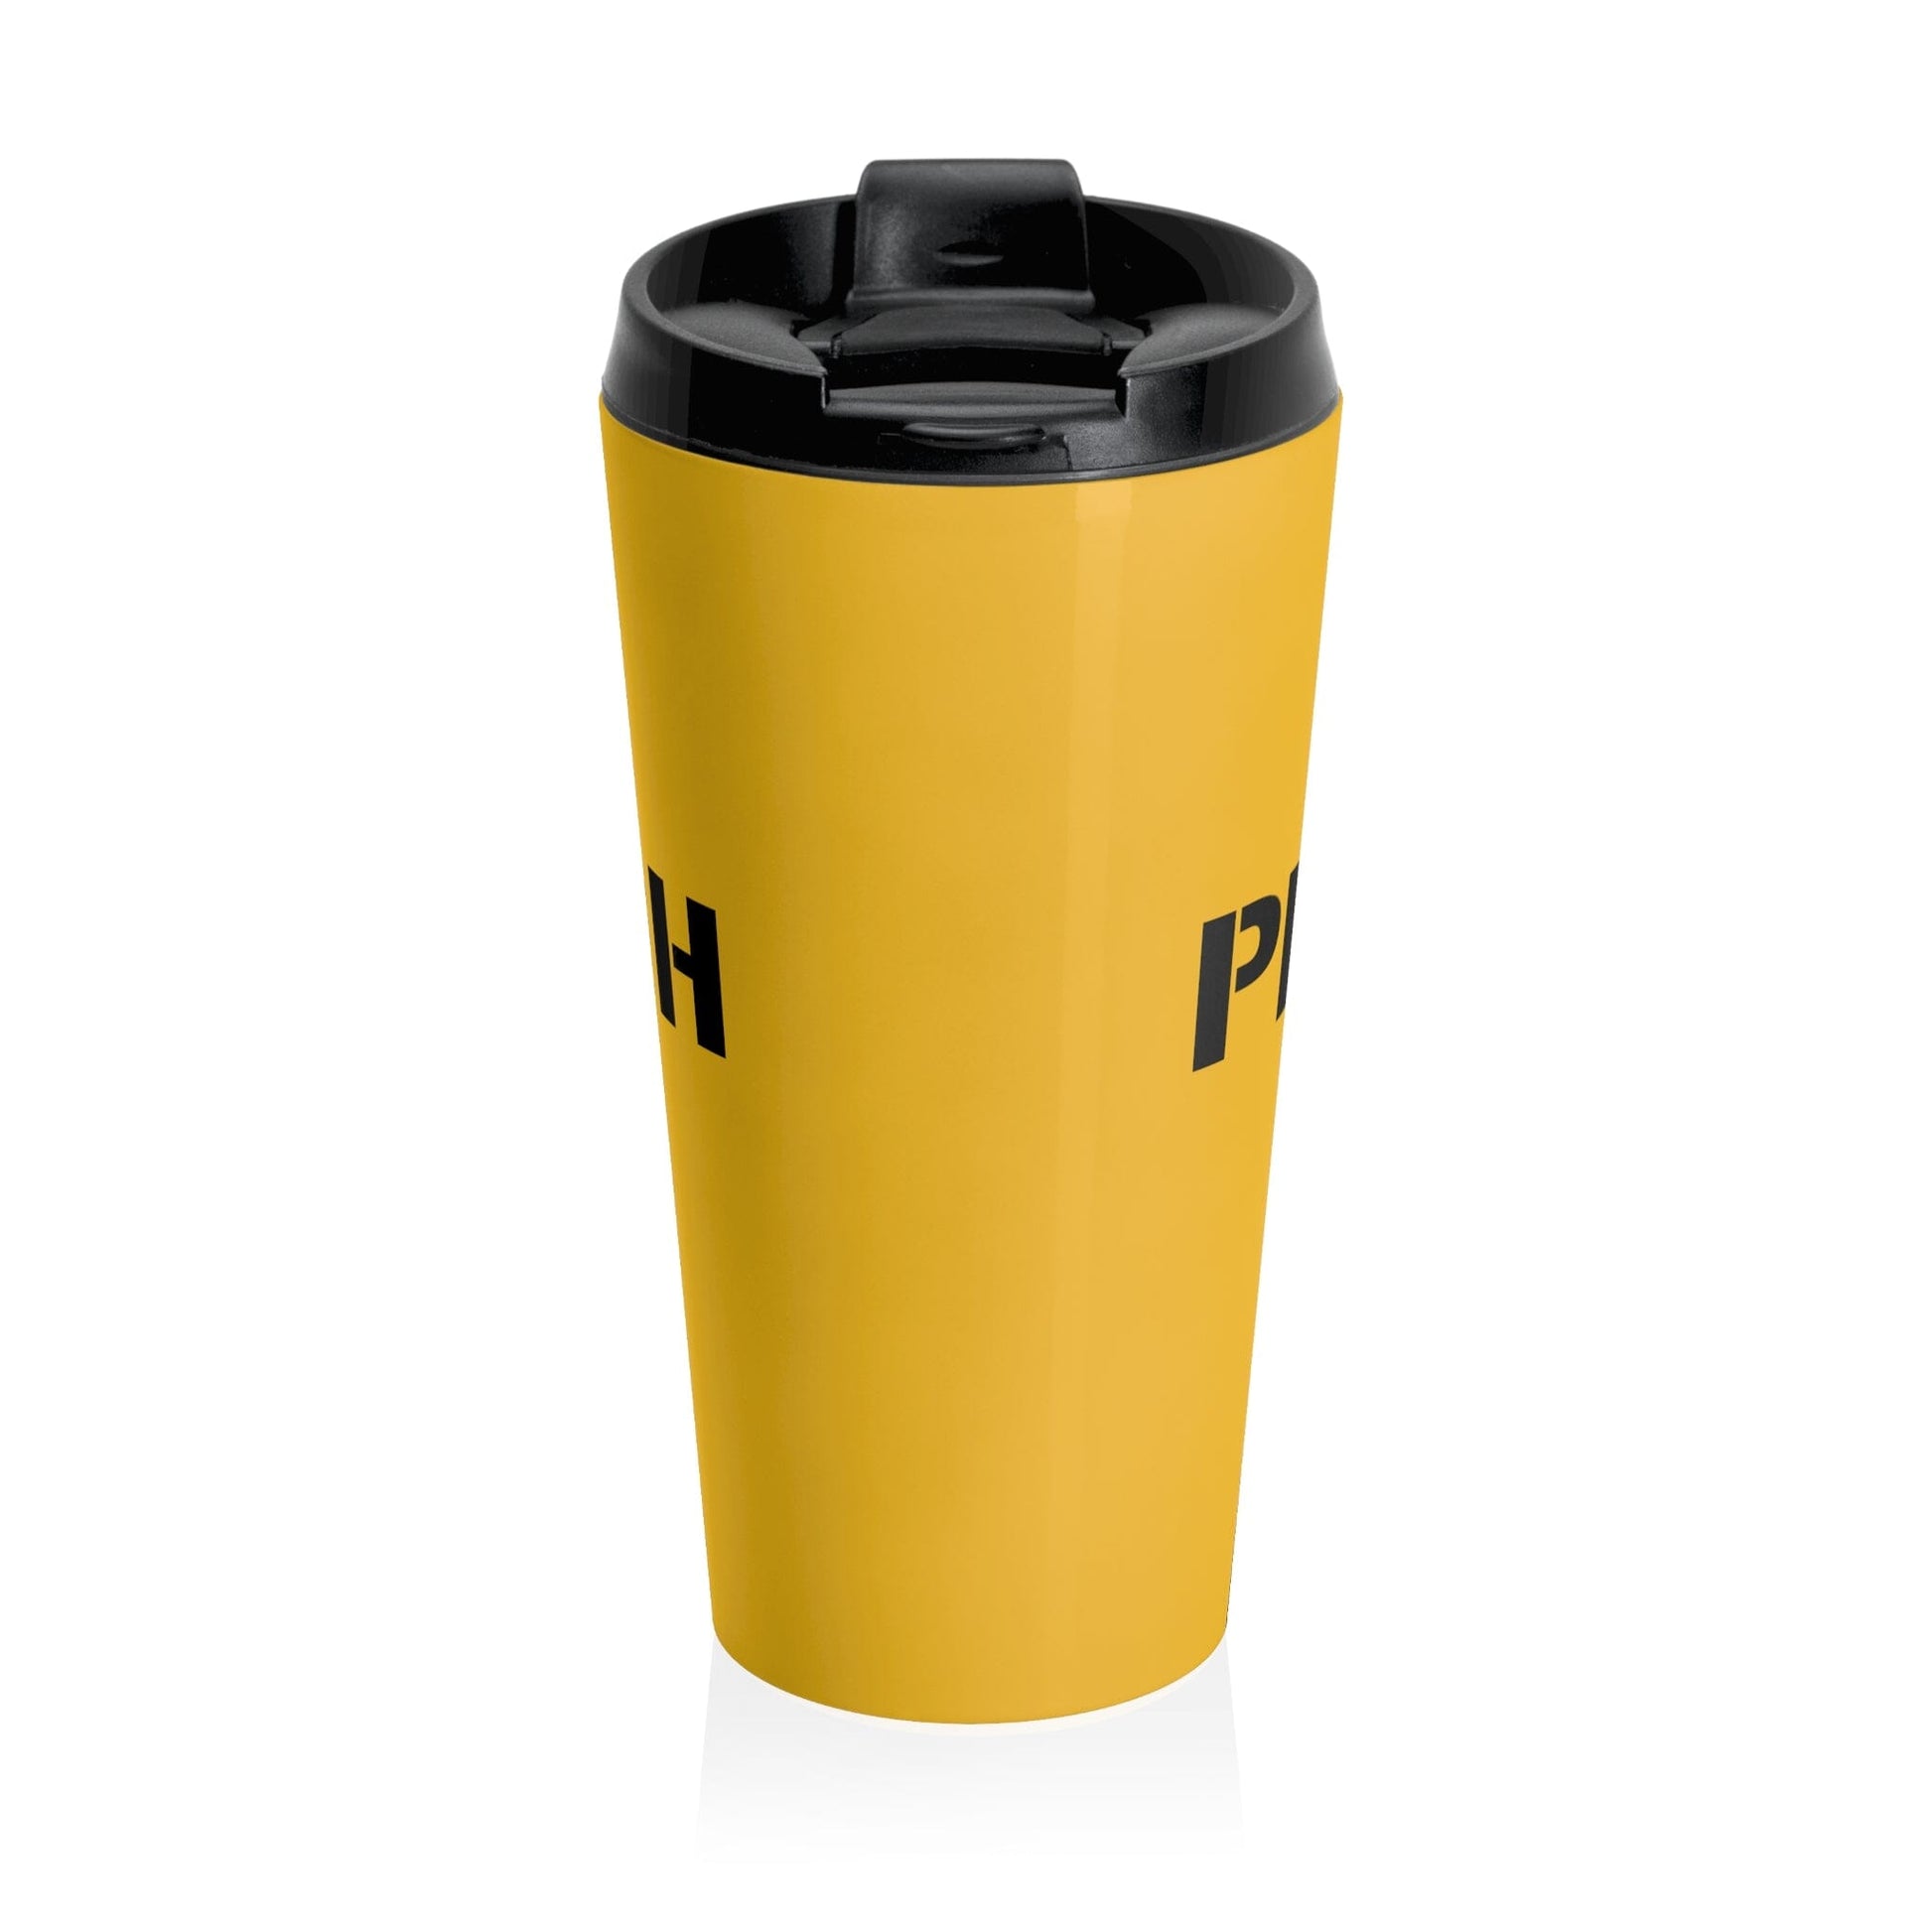 Sip the Spirit of the Steel City with the Pittsburgh Est 1758 Travel Mug - Gold Edition Mug Yinzergear 